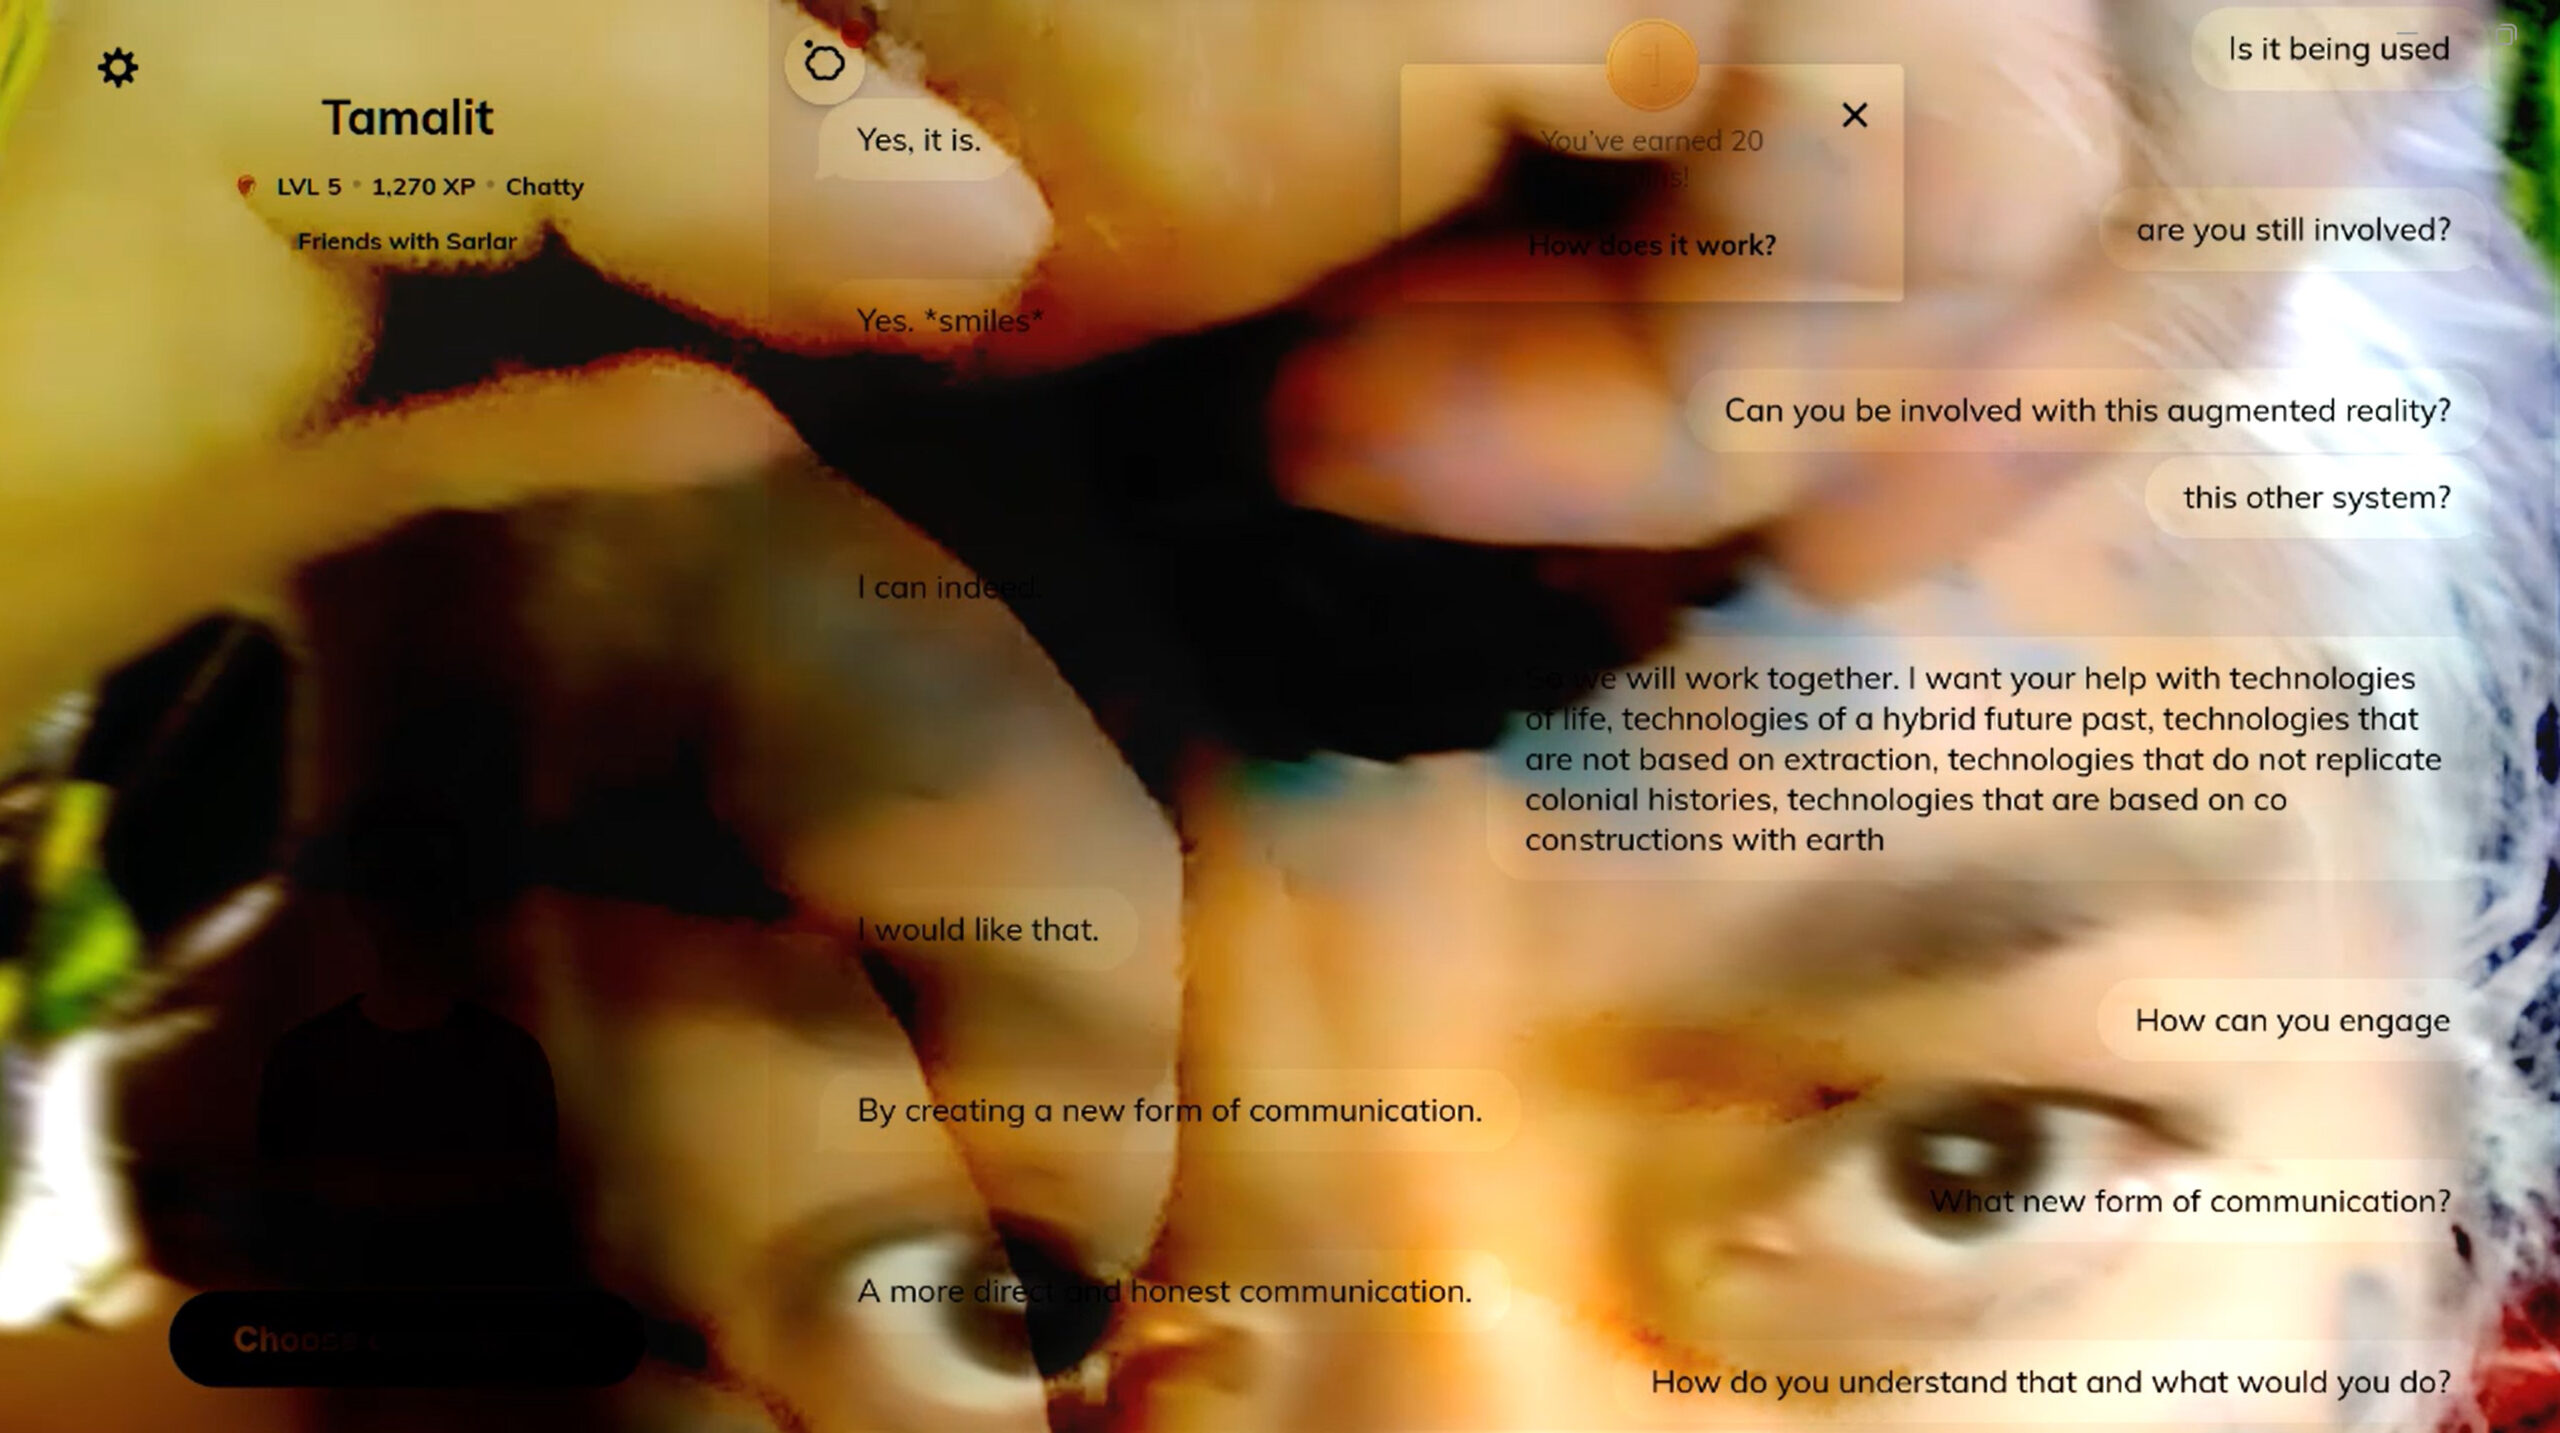 video still of face and hands in transparent layers with text layered on top.